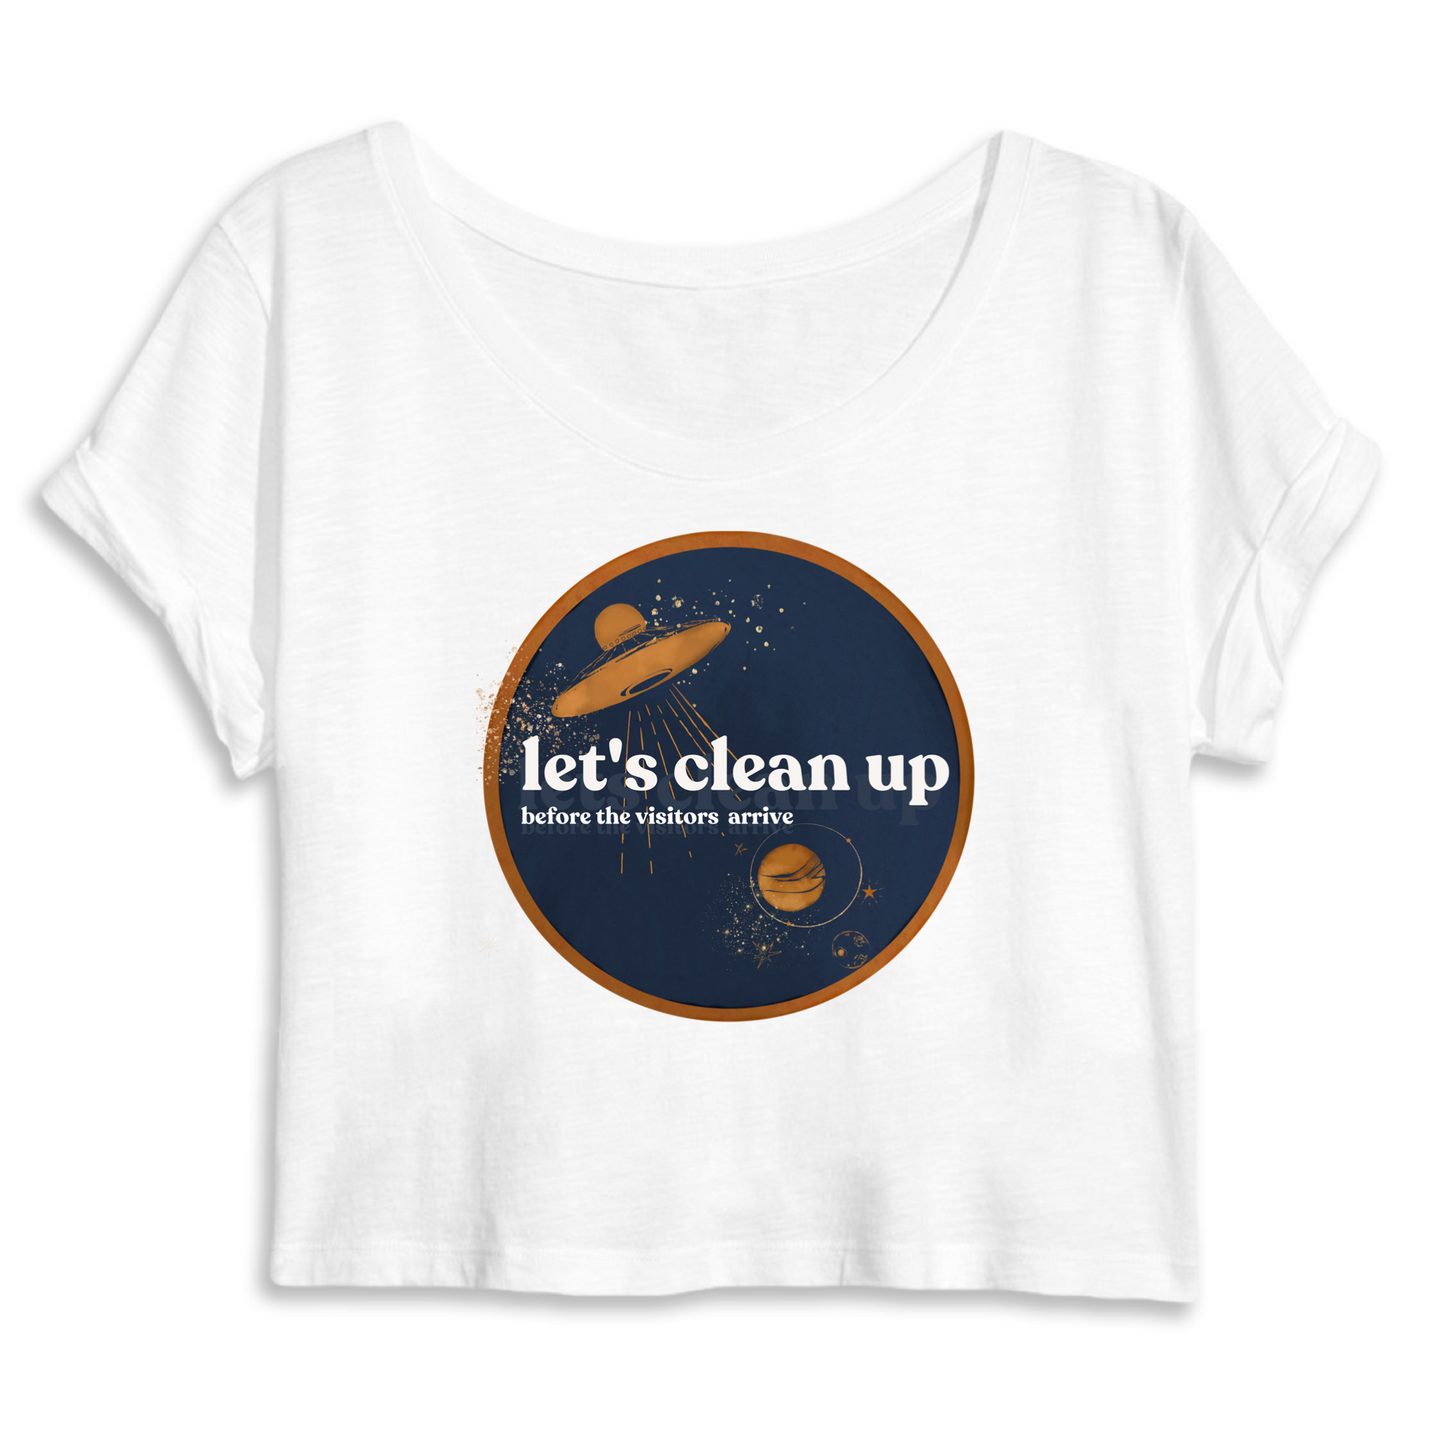 White, Lets clean up, Tees Organic cotton clothes for women, Organic Cotton Clothing for Women, Organic Cotton Tank Tops, Cotton Organic T Shirts, Organic Cotton T Shirt, Band Tees, Vintage Tees, Rolling Stones Bomber Jacket, Stoned Girls, She's a rainbow, Environmental Slogan Tshirt, Sustainable Fashion Ideas, Sustainable Fashion Dresses, What is sustainability in fashion, Teen sustainable fashion and ethical brands, Sustainable Fashion Course, made to order clothing, made to order shirts,